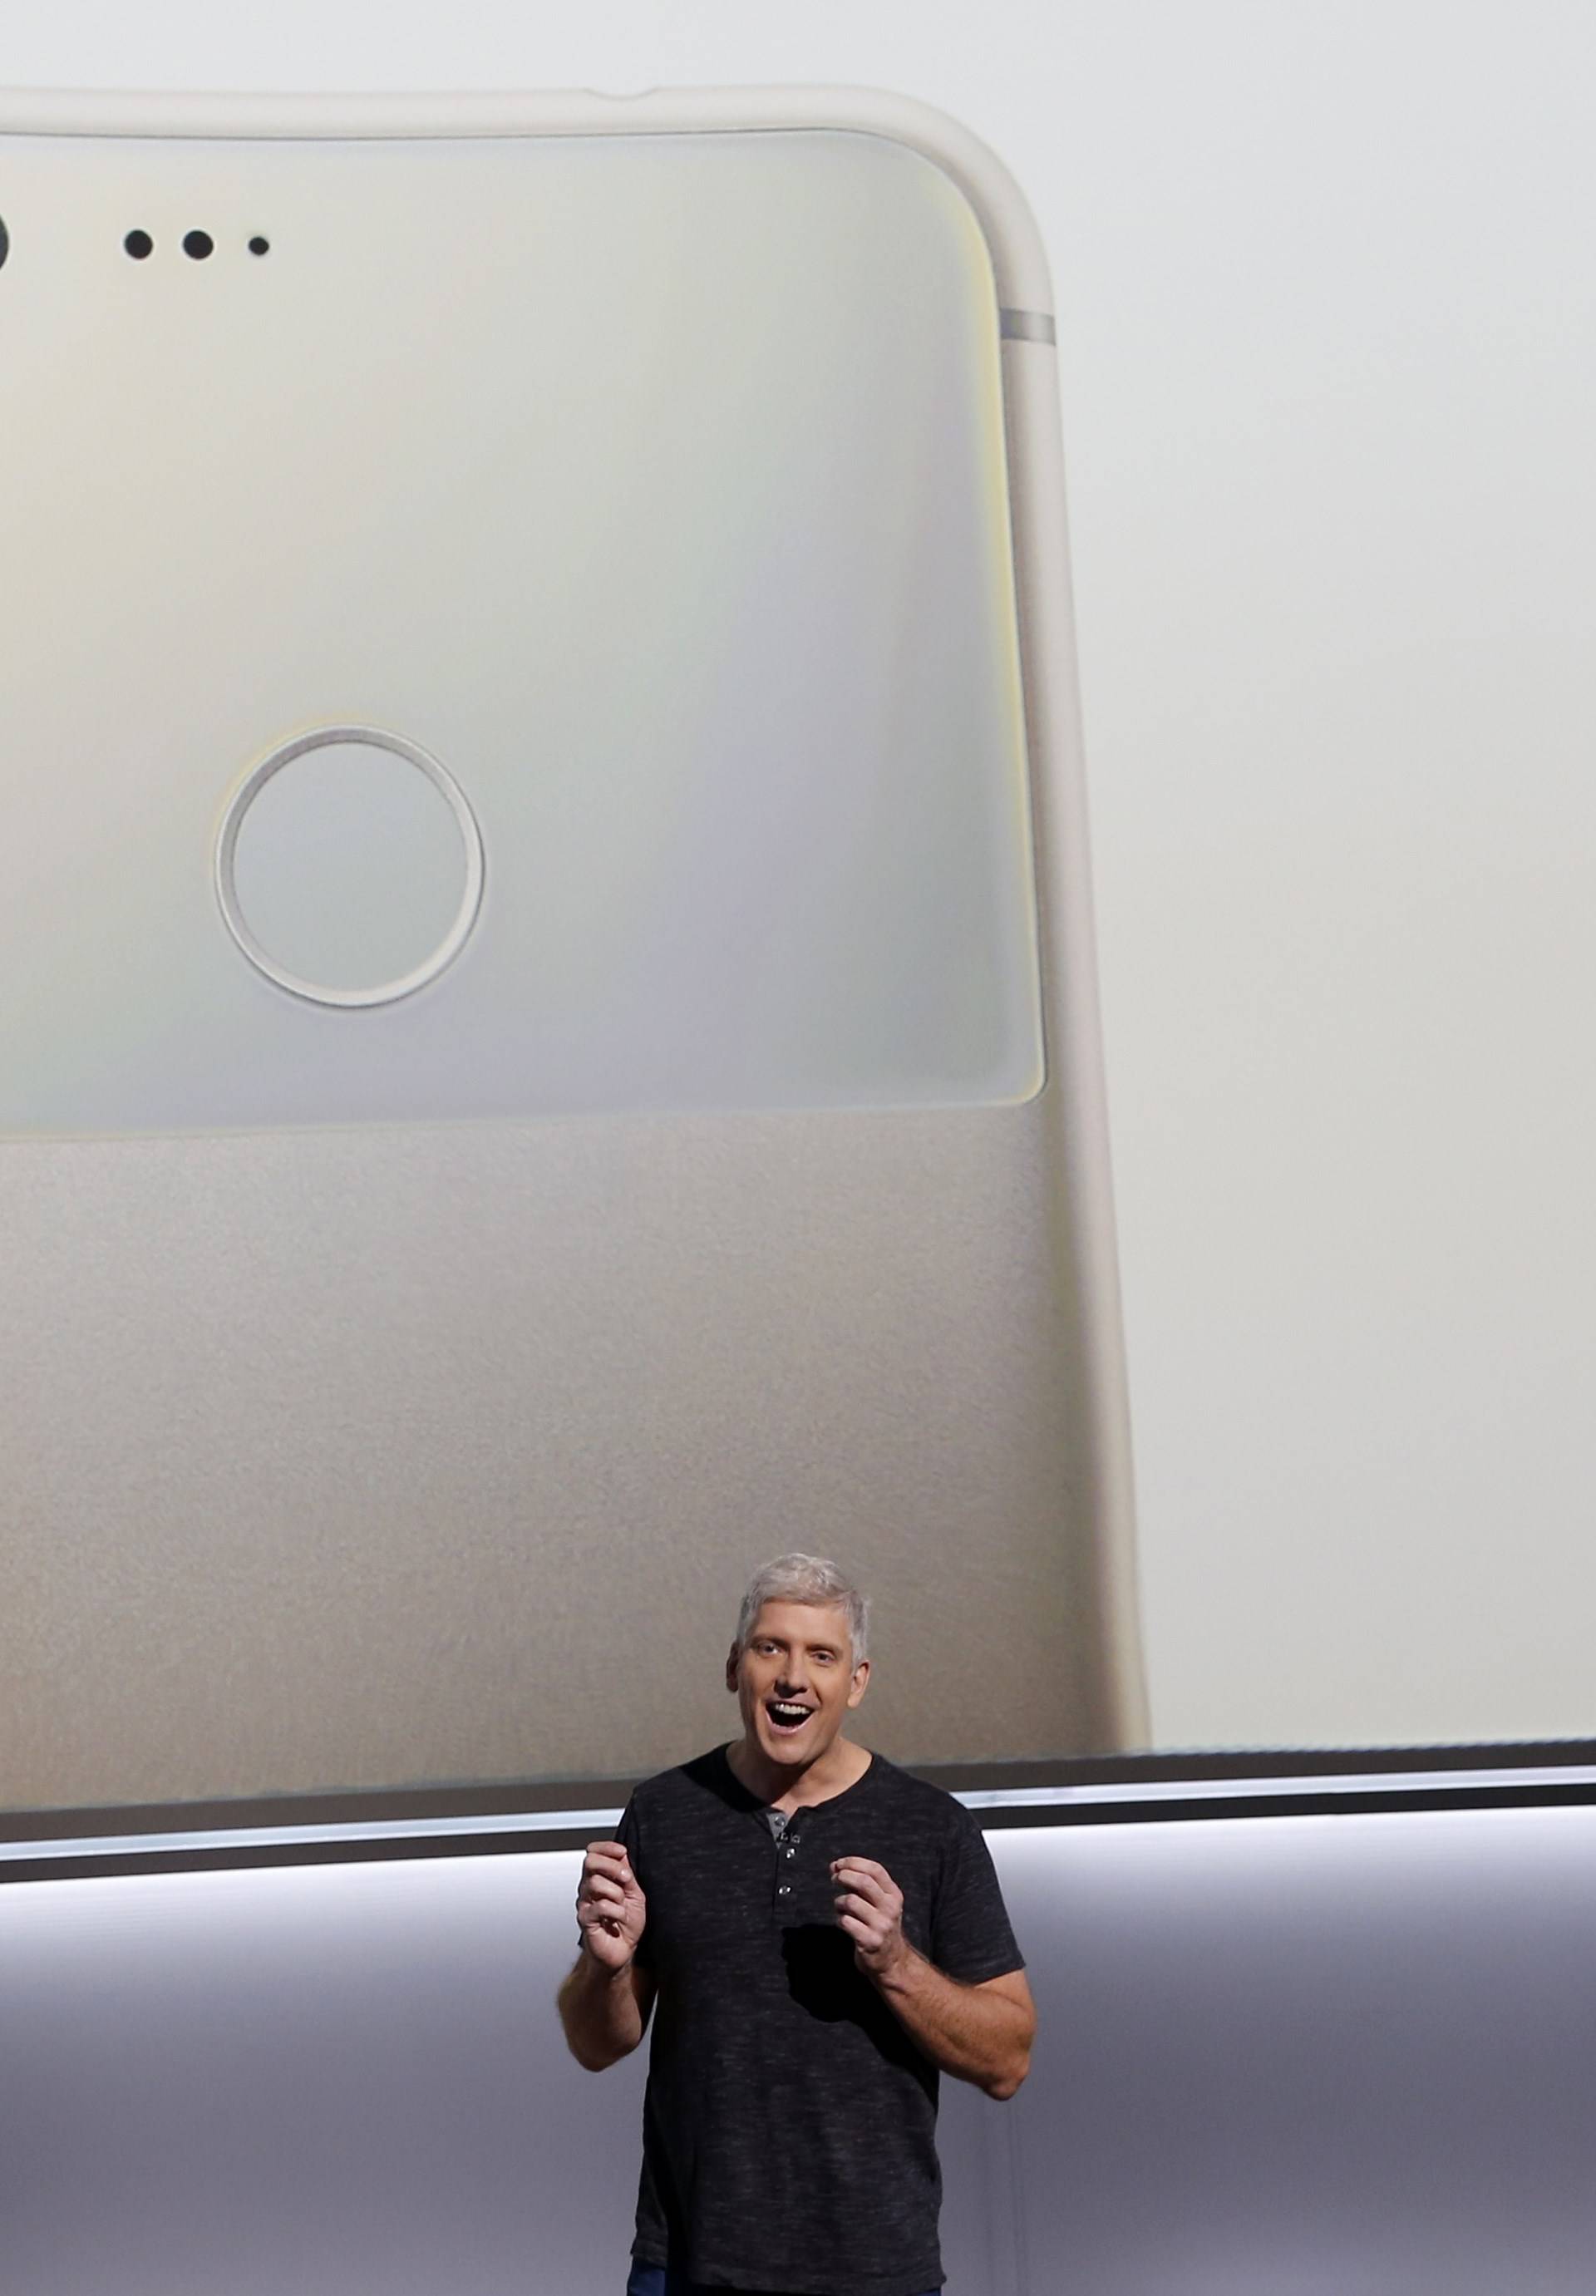 Google's Osterloh speaks during a launch event in San Francisco